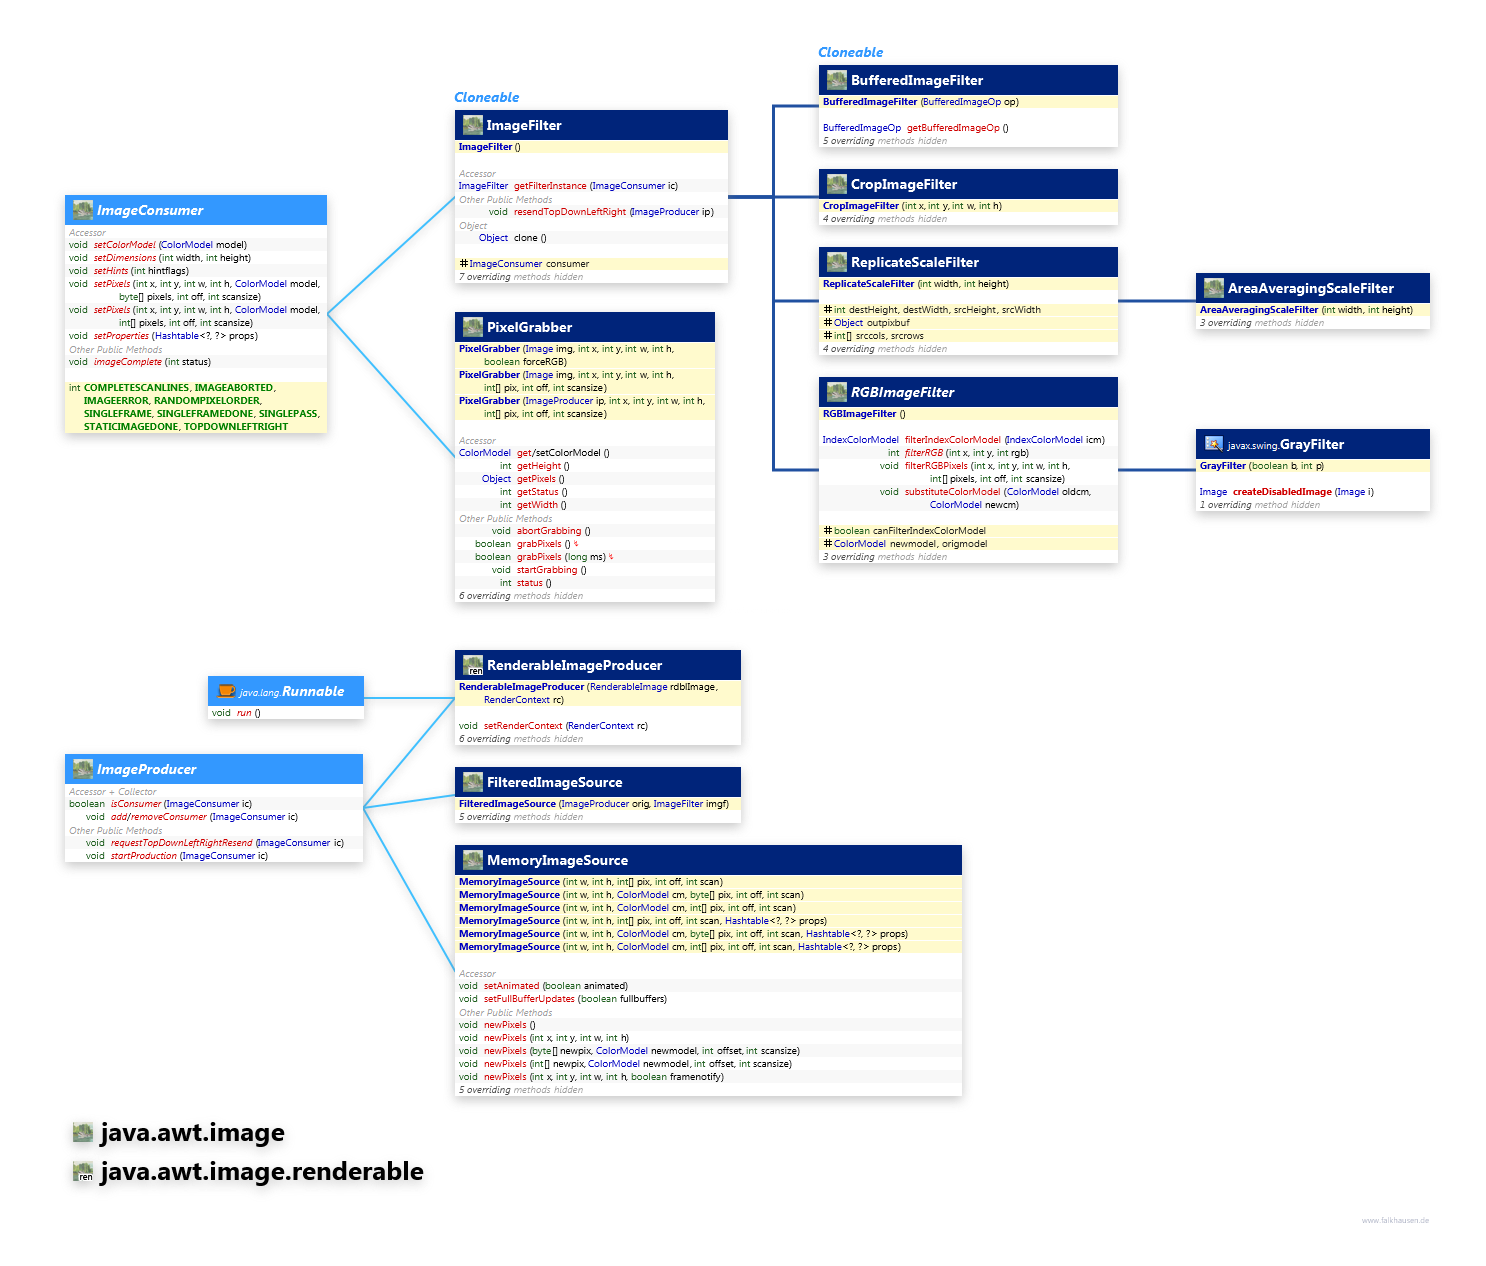 java.awt.image java.awt.image.renderable Consumer, Producer class diagram and api documentation for Java 7